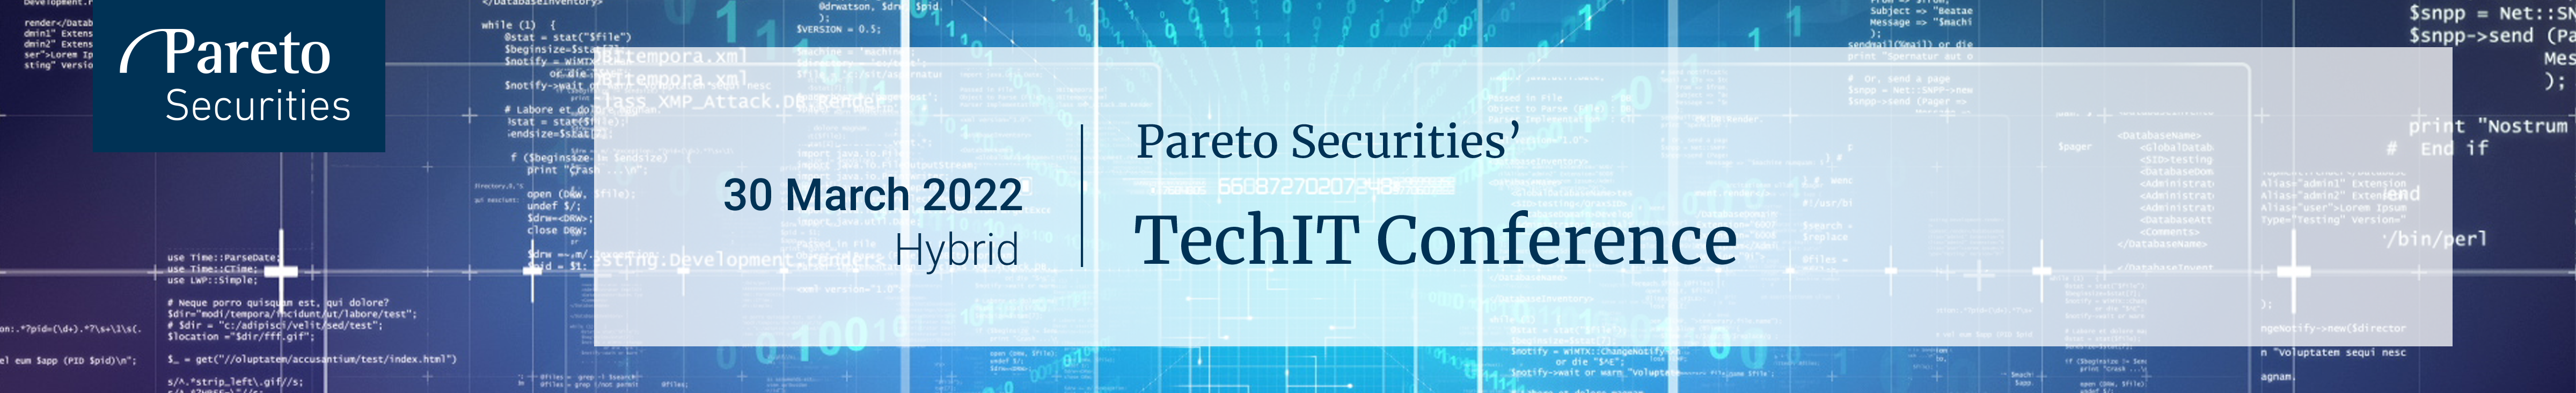 Header image for Pareto Securities' TechIT Conference